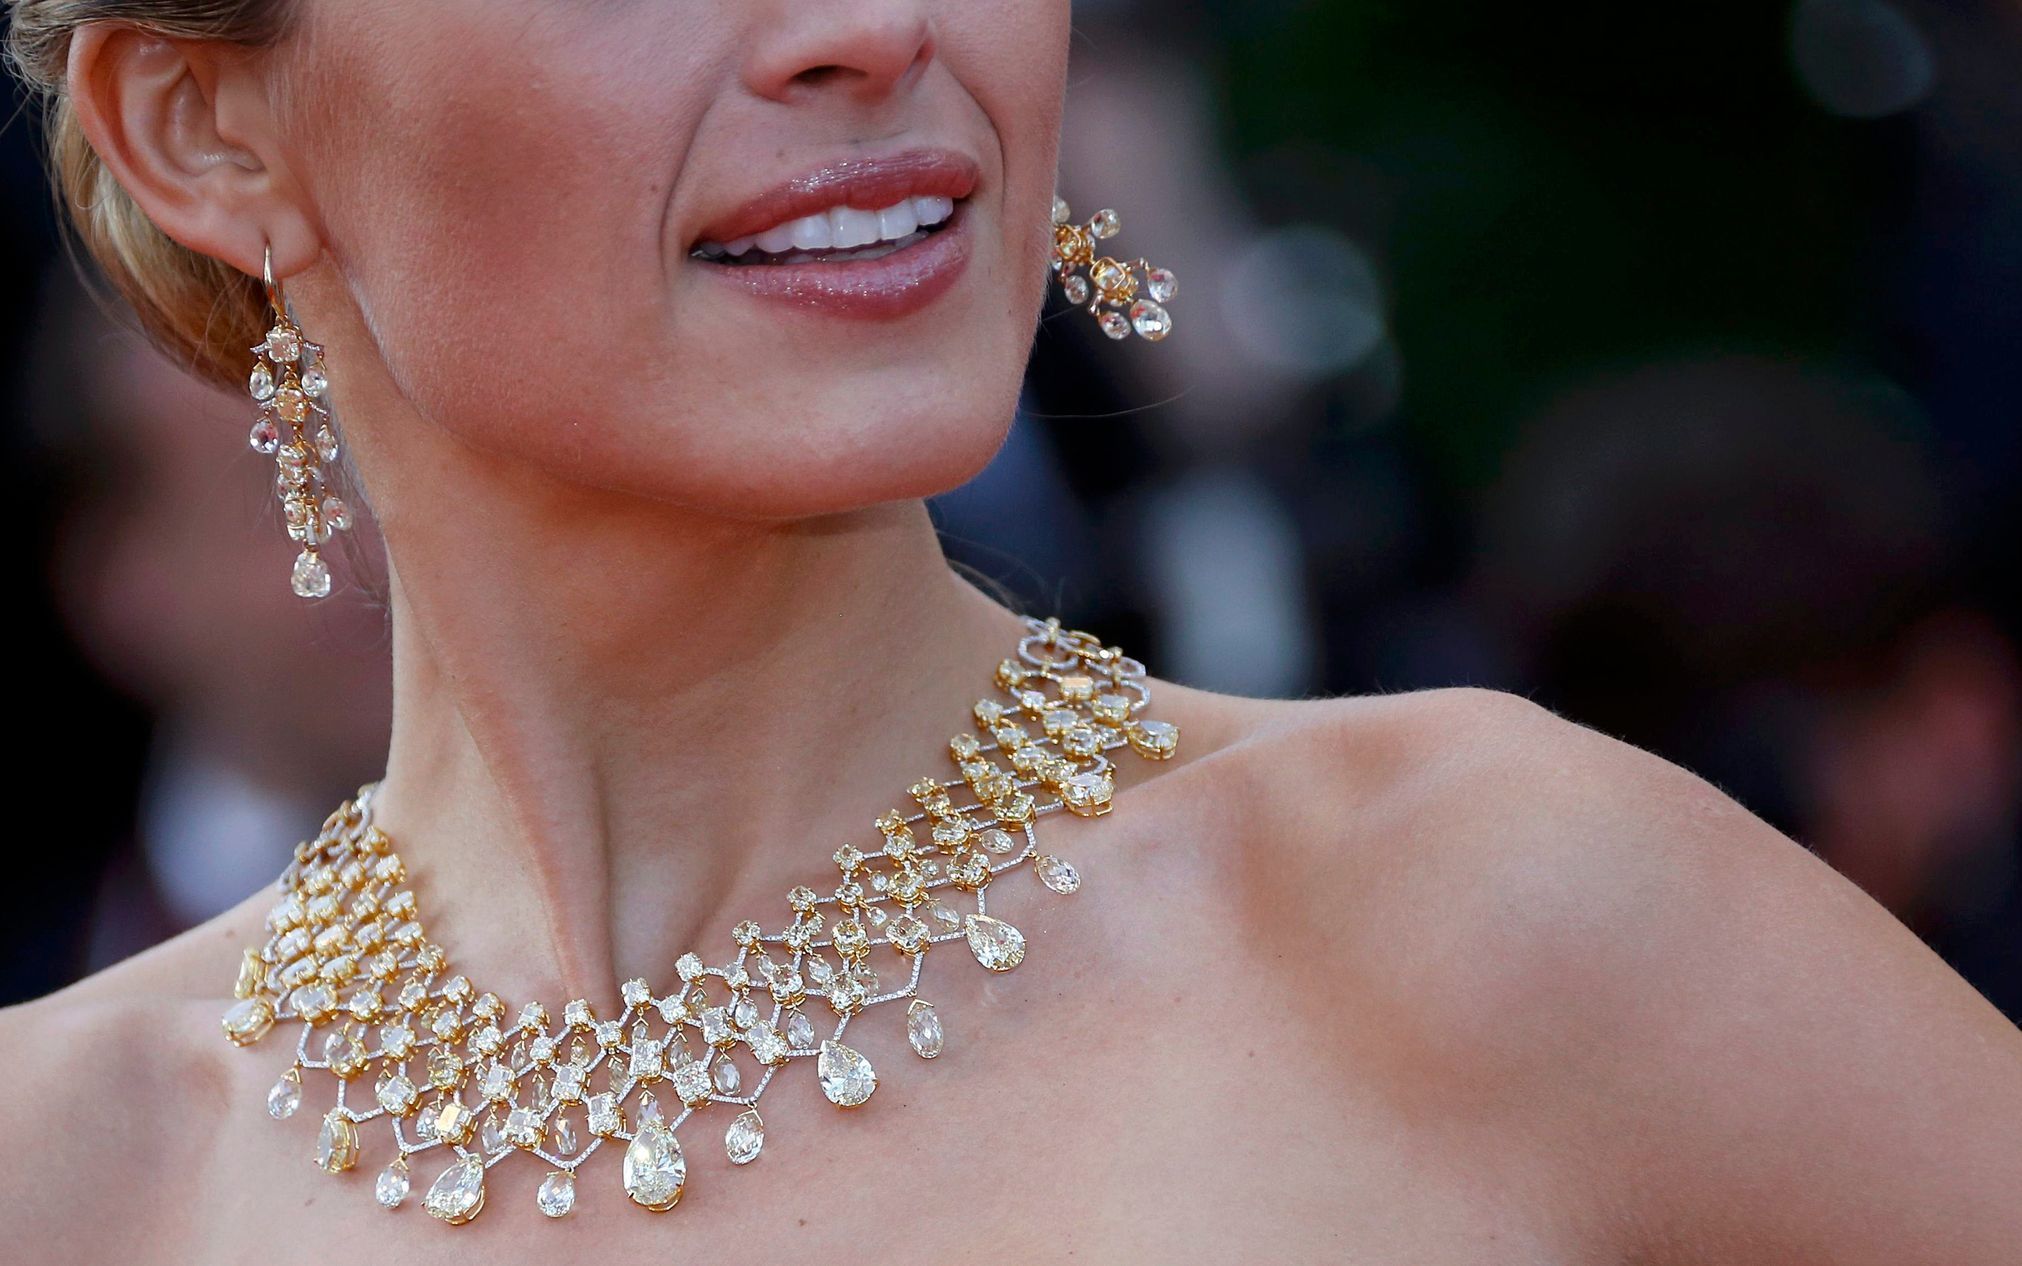 Jewellery worn by model Petra Nemcova are pictured as she poses on the red carpet for the screening of the film &quot;Deux jours, une nuit&quot; at the 67th Cannes Film Festival in Cannes